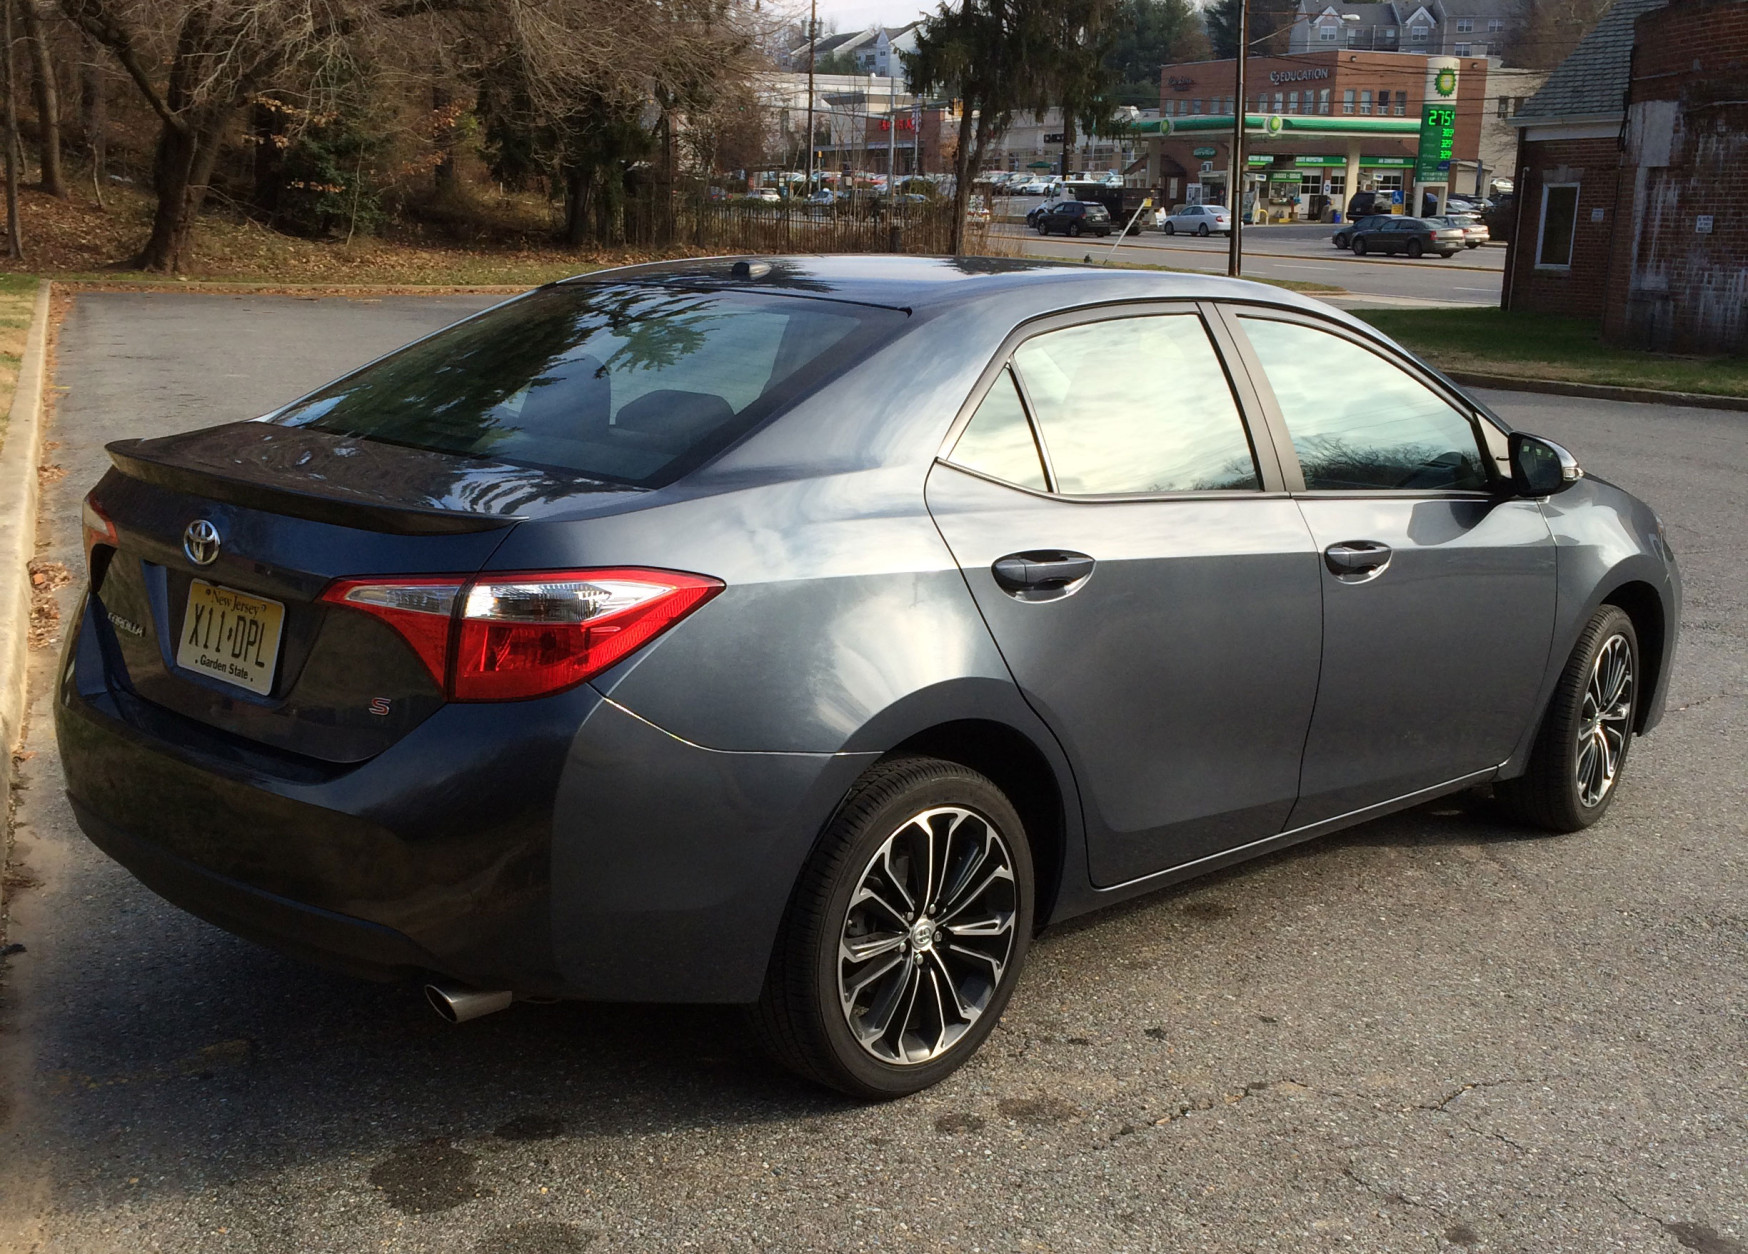 The Corolla has grown over 40 years, but it's still a bargain sedan that's very reliable. (WTOP/Mike Parris)